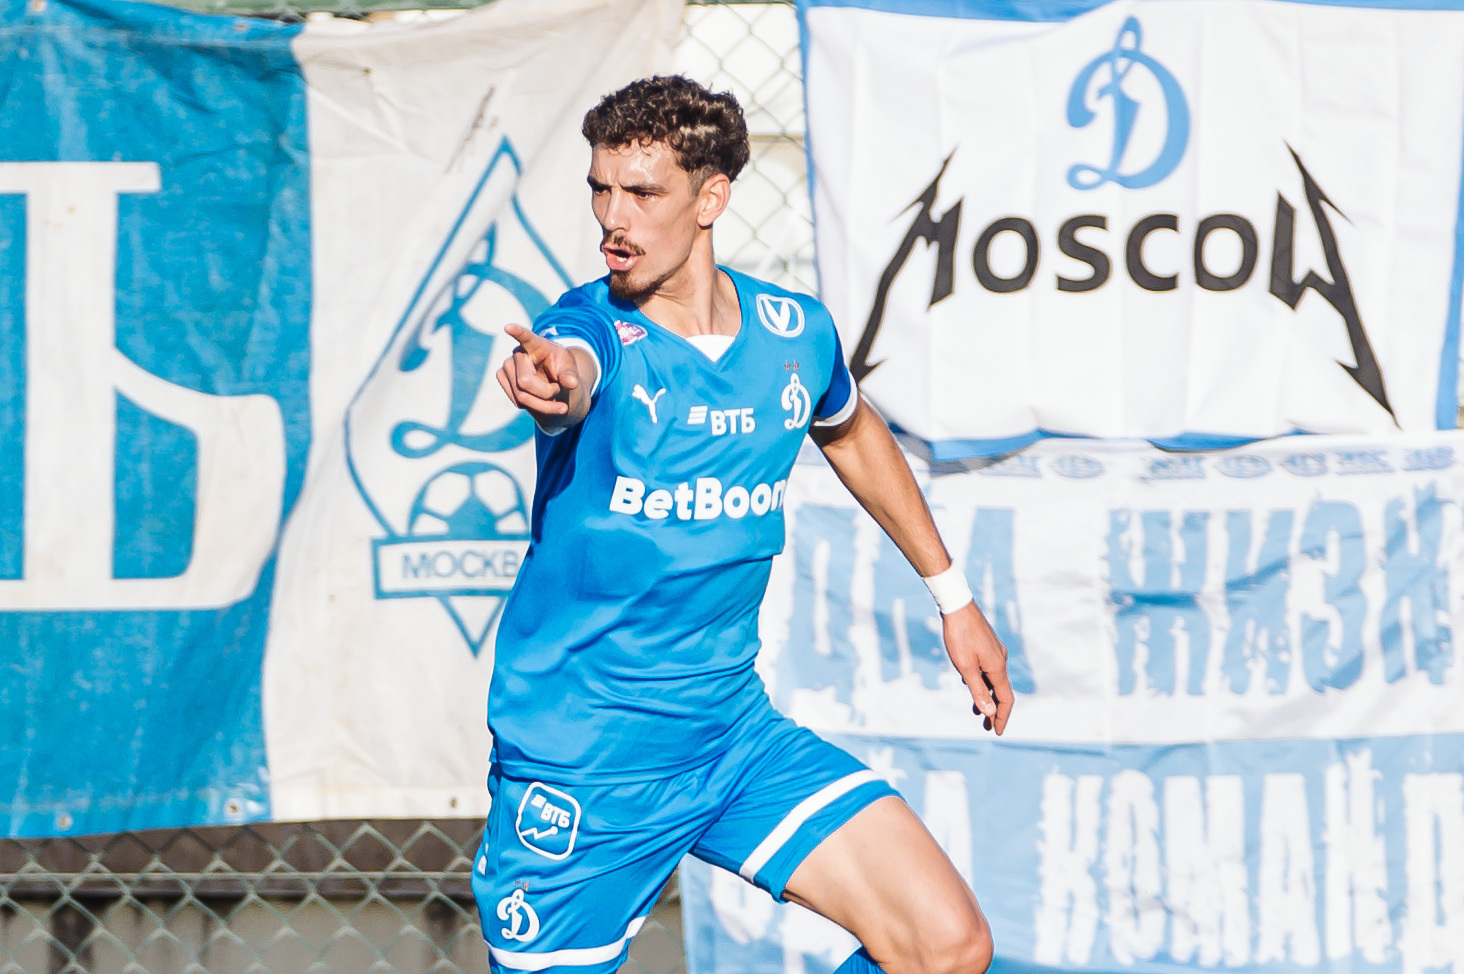 FC Dynamo Moscow News | Nicolas Marichal: "Coordinated work and absence of selfishness on the field bring us success." Official Dynamo Club Website.